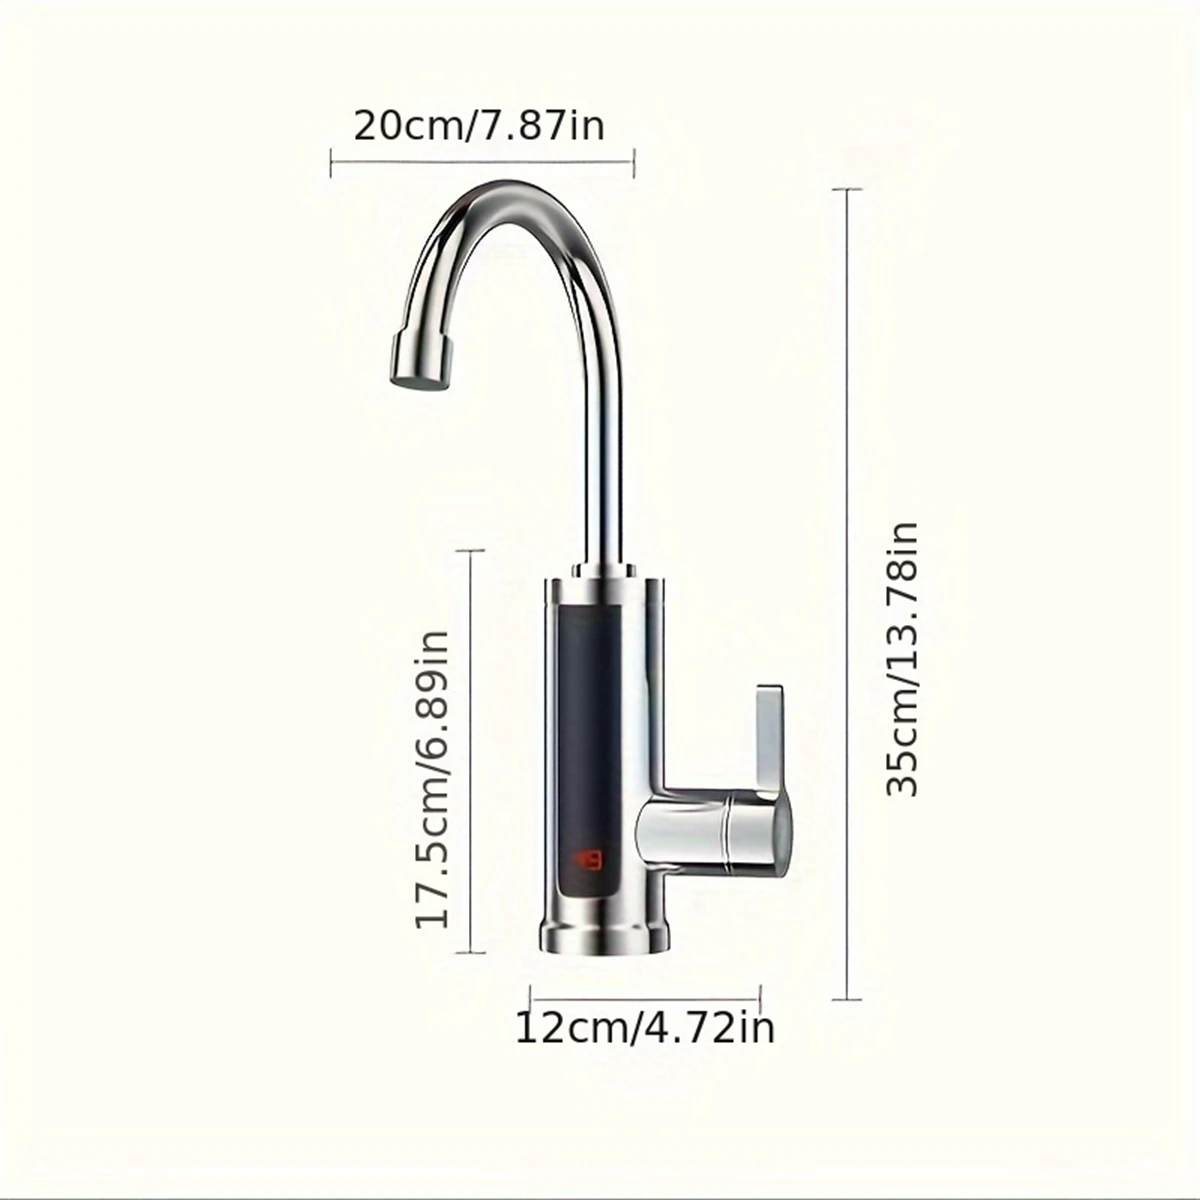 Instantaneous Digital Display Electric Kitchen and Bathroom Quick-heating Heating Faucet RX-011-1